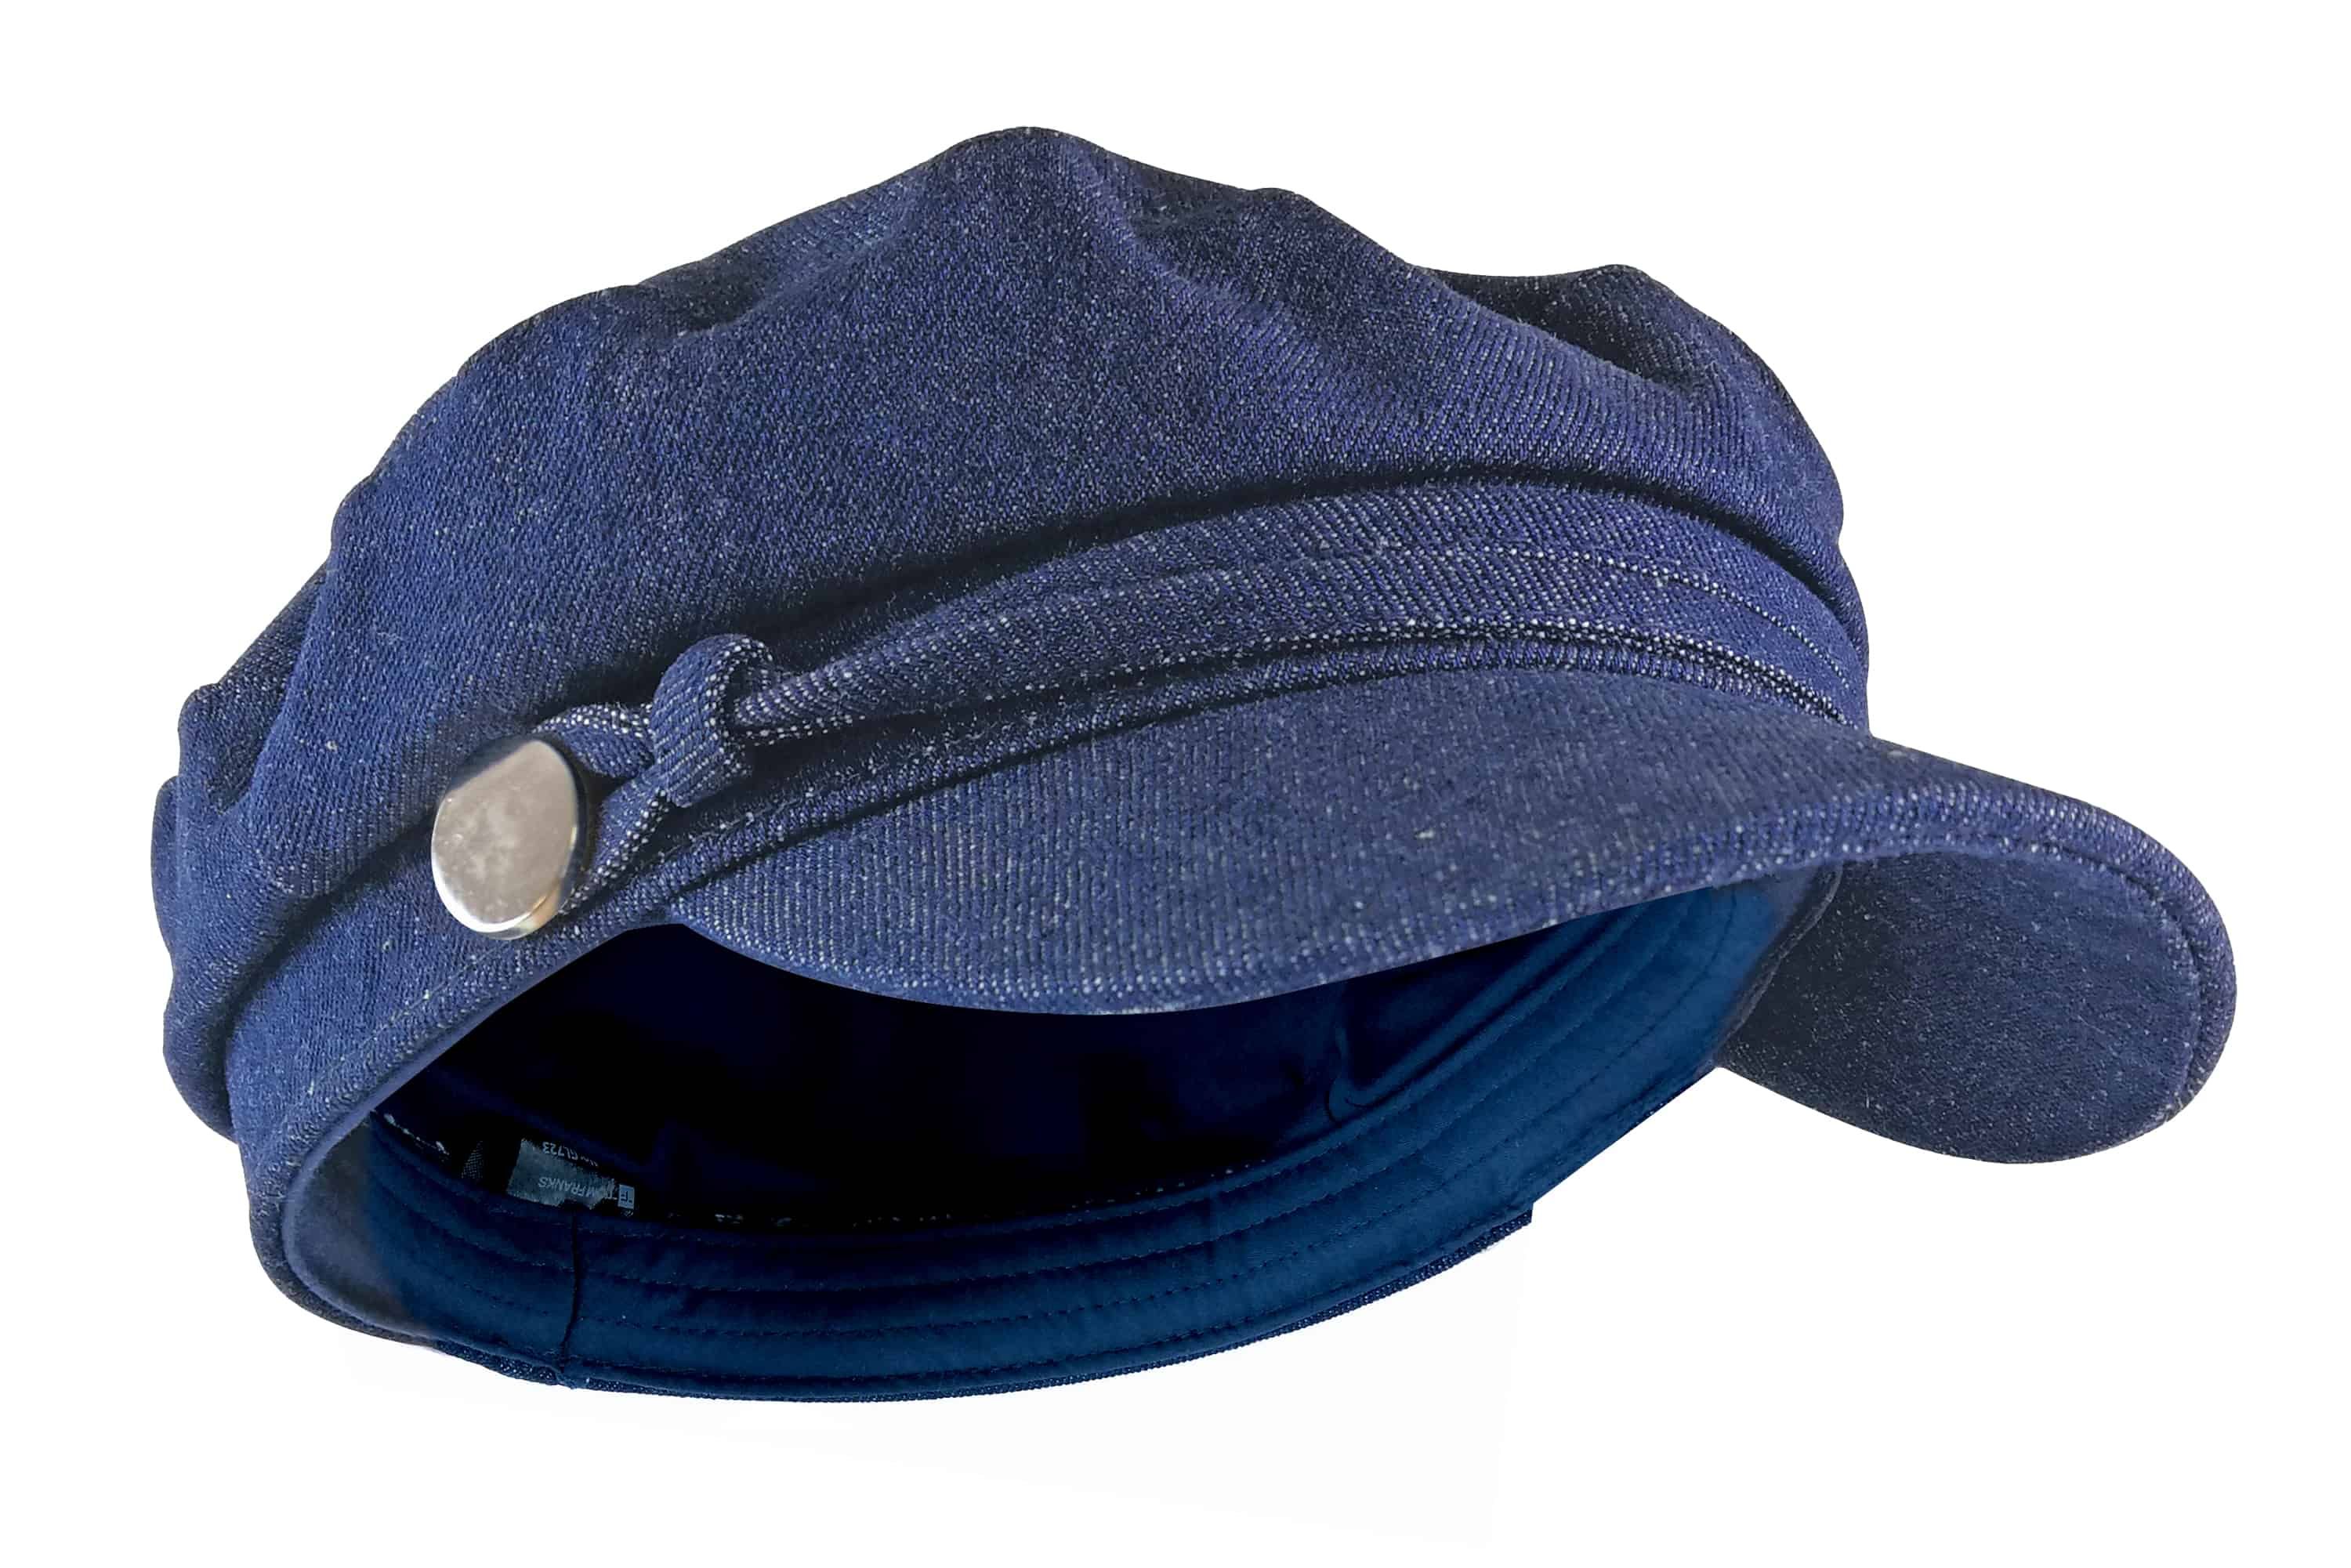 Ladies 100% Cotton Cord / Denim Flat Cap   If you are looking to bring a retro look back into your wardrobe then why not consider one of the options here on offer being a dark blue denim or a pink cord flat cap.   The cap has a solid visor to help keep the sun off your face. There are also gold coloured buttons on the side of the cap to enhance the vintage look on the flat cap. The cap is also made out of 100% cotton so that the feel is as soft as possible on your head.   These ladies cap are available in one size and are available in 2 designs. They are made from 100% cotton and they must be washed by hand.   Extra Product Details   Ladies Flat Caps  Denim & Cord Designs  One Size  Vintage Look  100% Cotton  Hand Washable